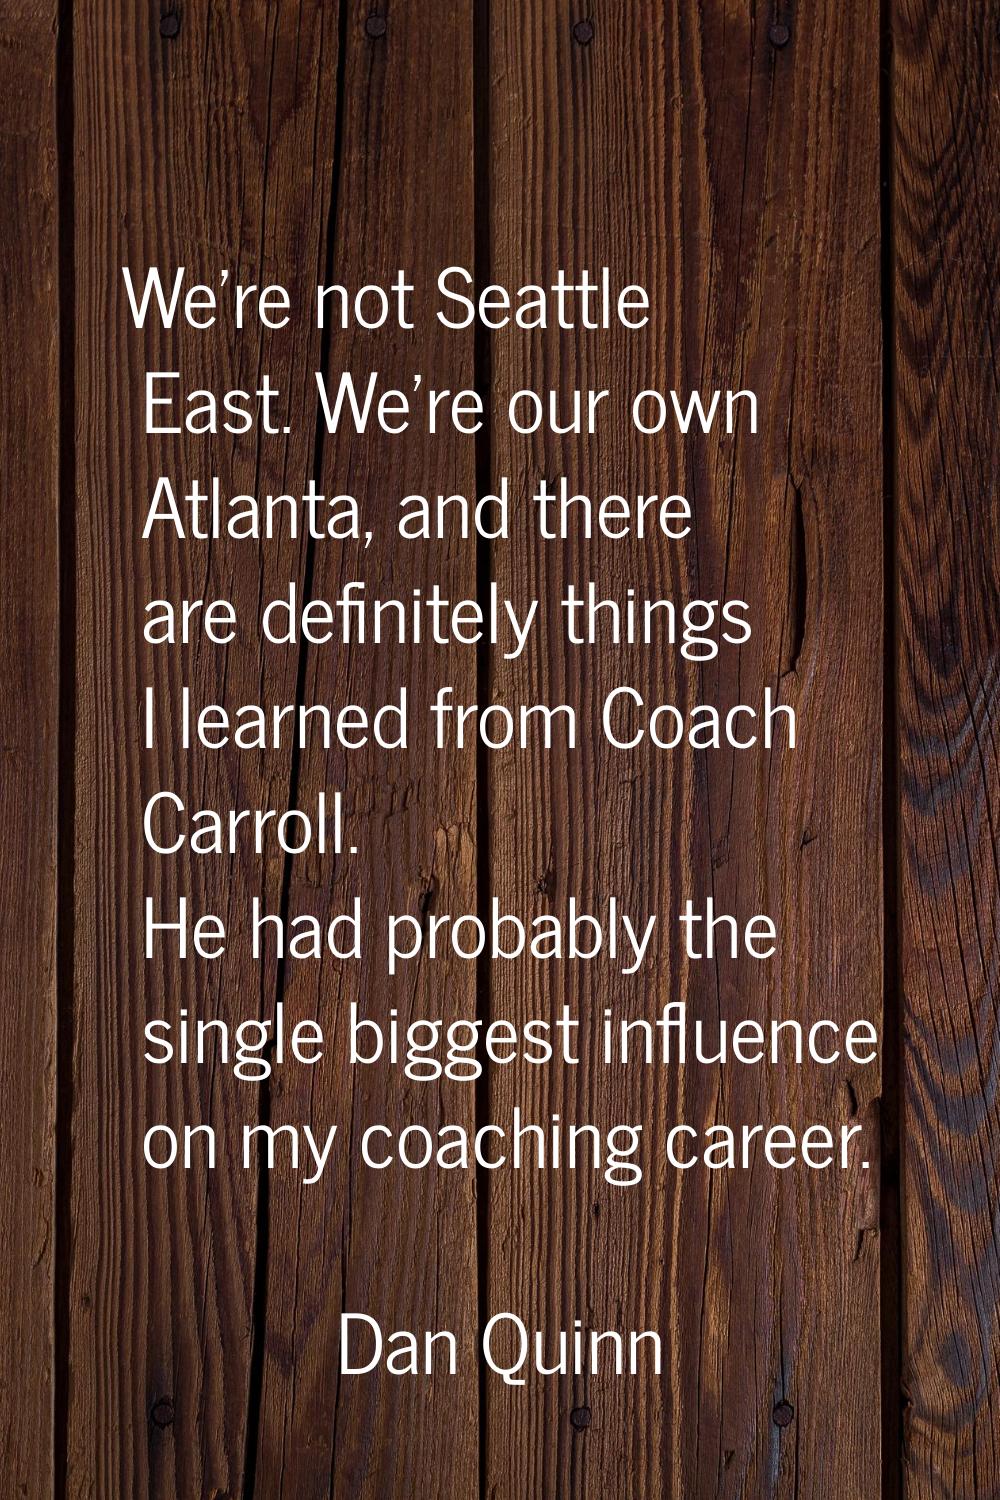 We're not Seattle East. We're our own Atlanta, and there are definitely things I learned from Coach